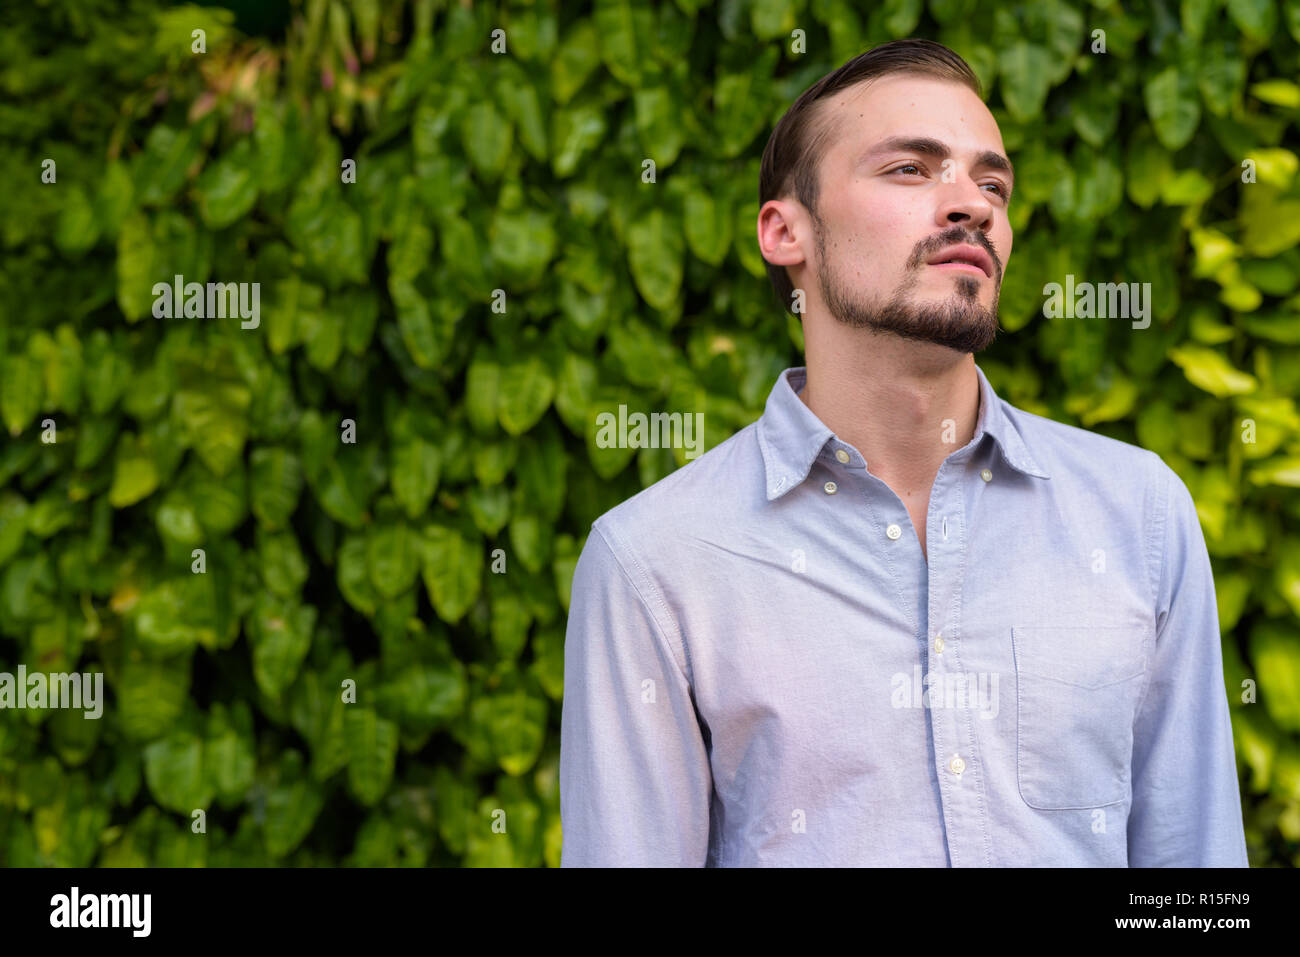 Portrait of young bearded fashionable man outdoors Stock Photo